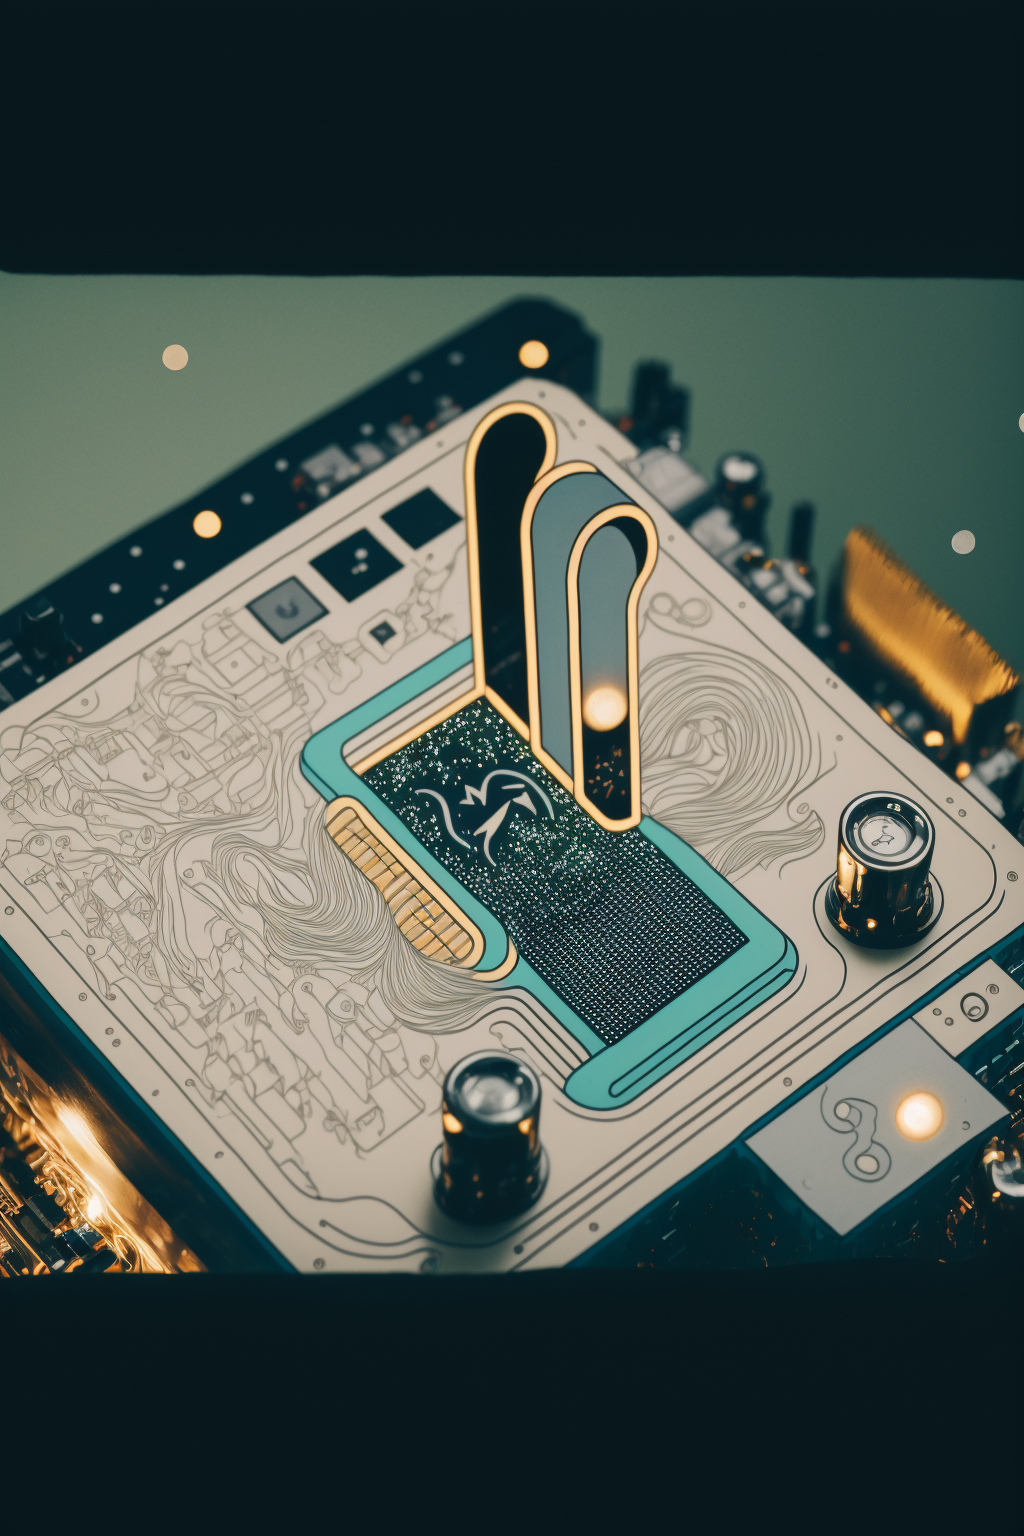 treckkfreak_computer_transistor_close-up_realism_detailed_35mm__d9c90bc6-14f8-40ef-aa29-5adc1d...png